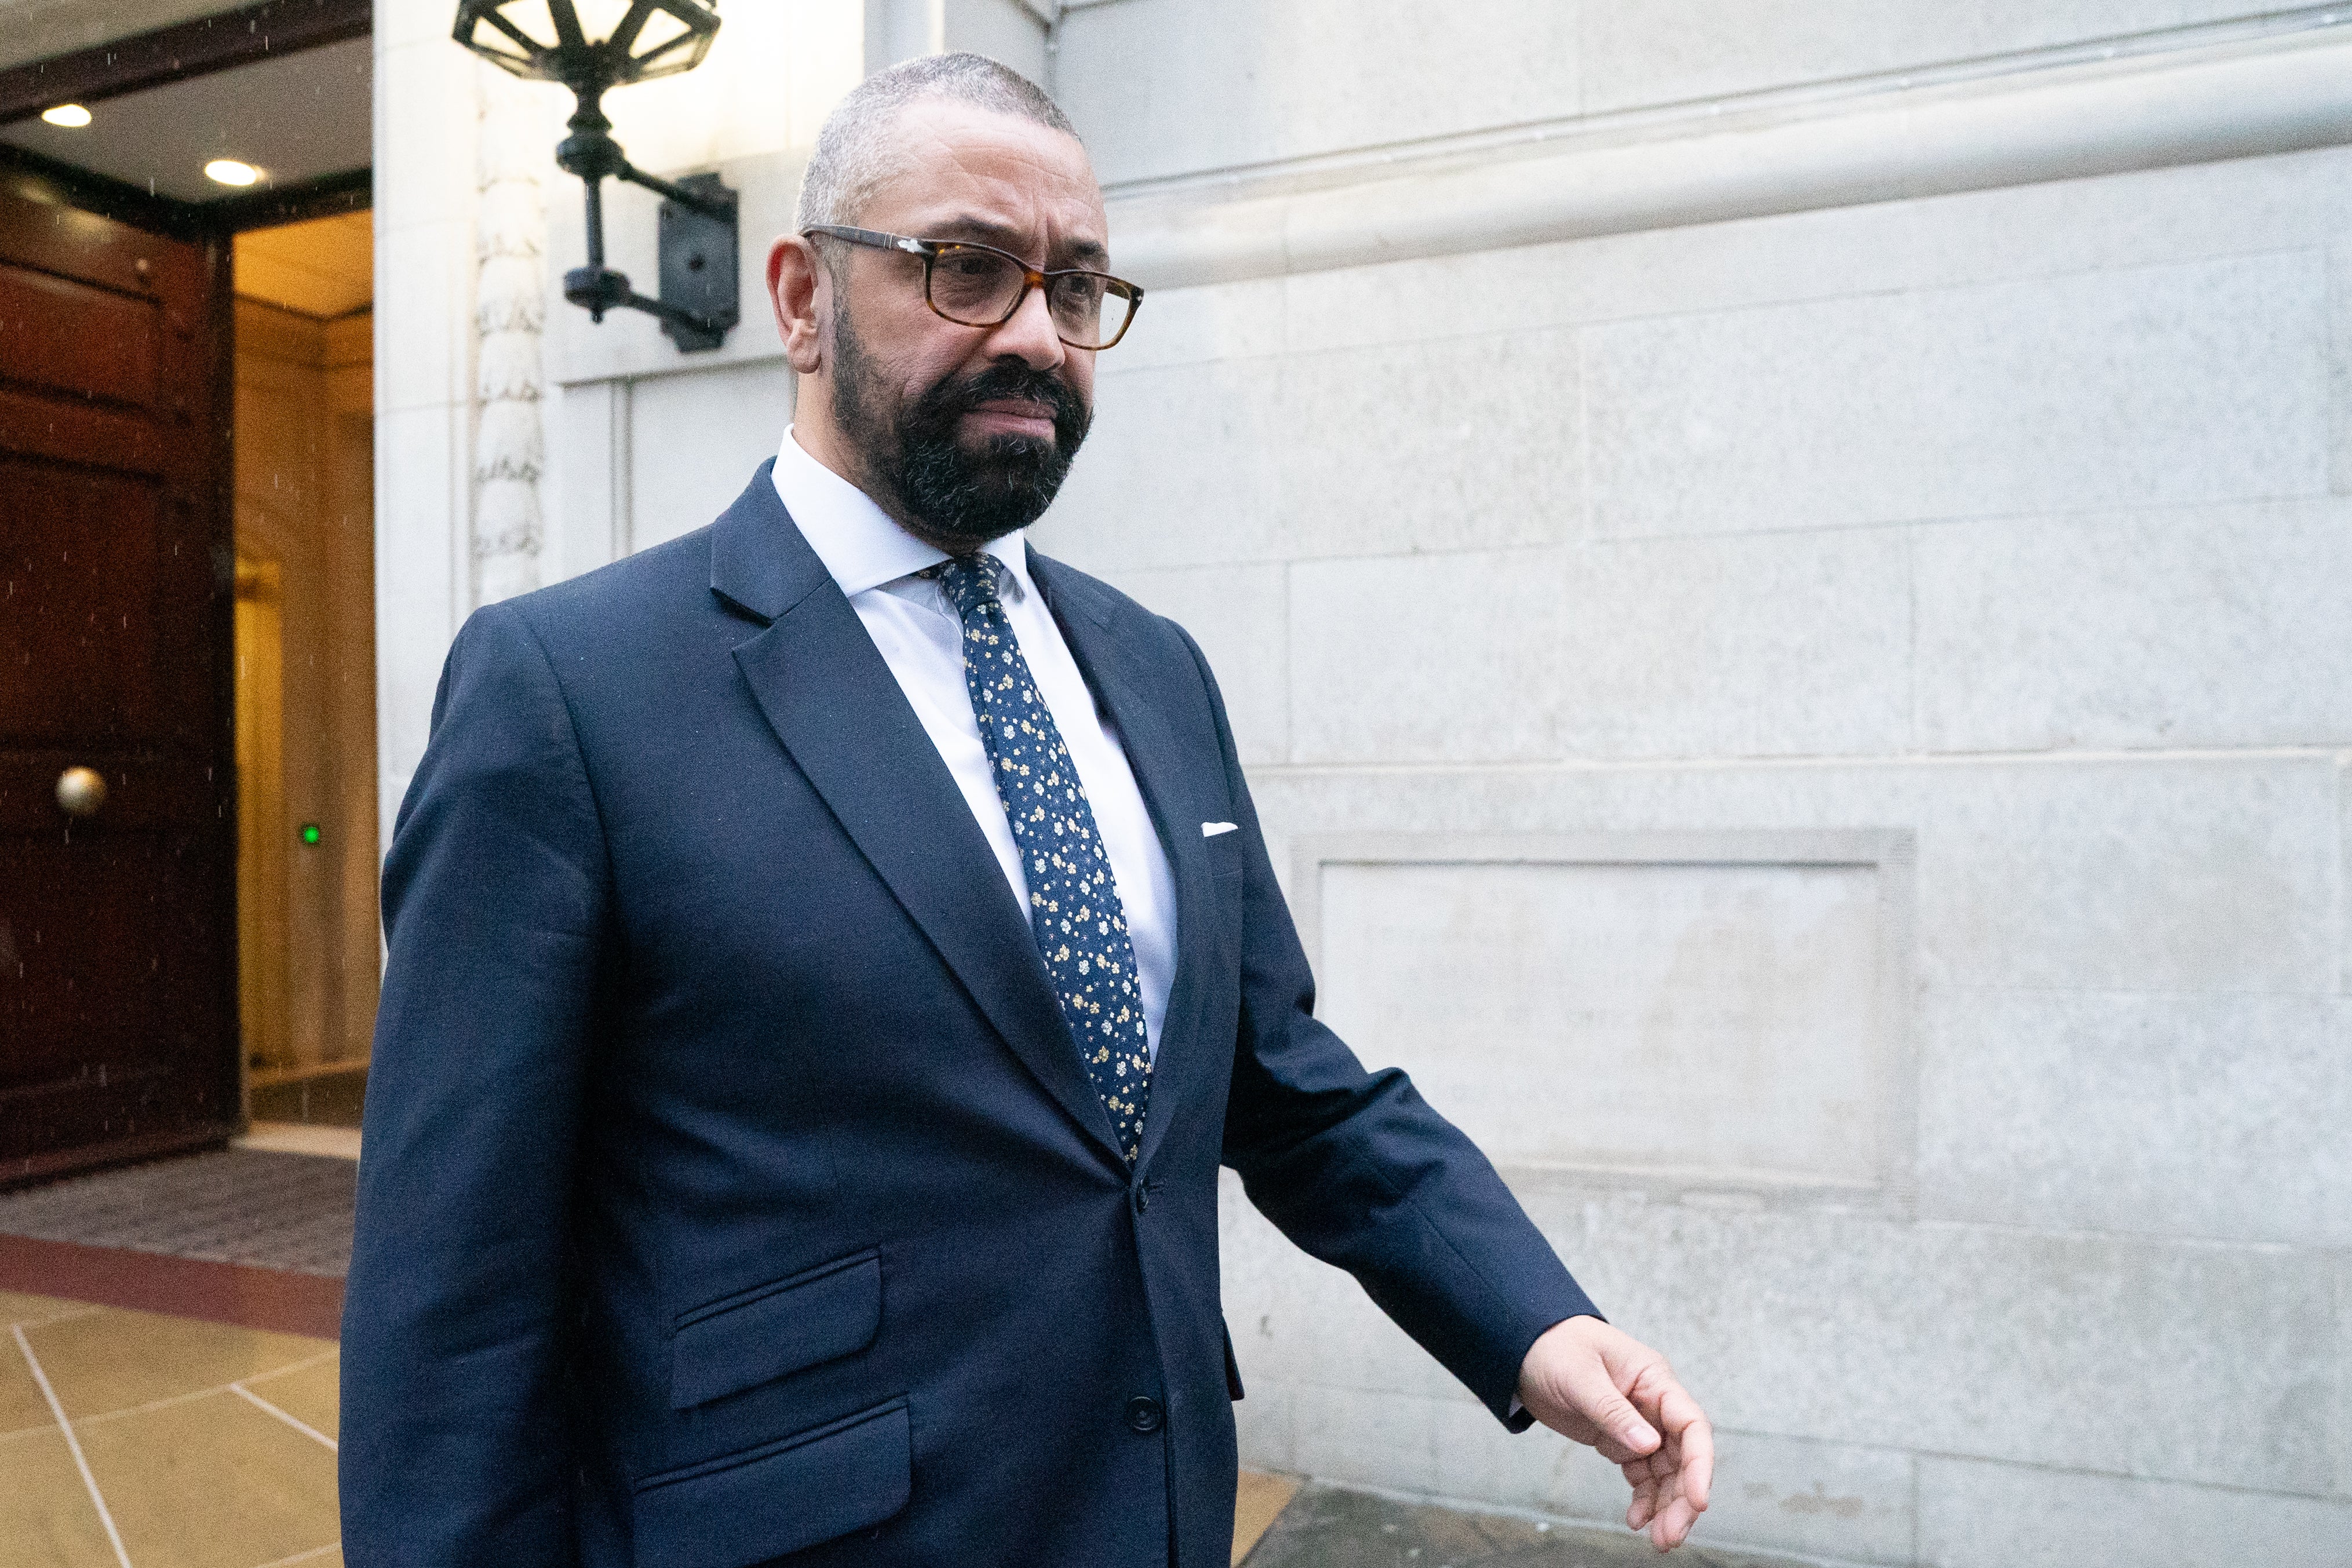 James Cleverly told media that it was ‘impossible’ to know when the backlog of legacy asylum claims would be cleared